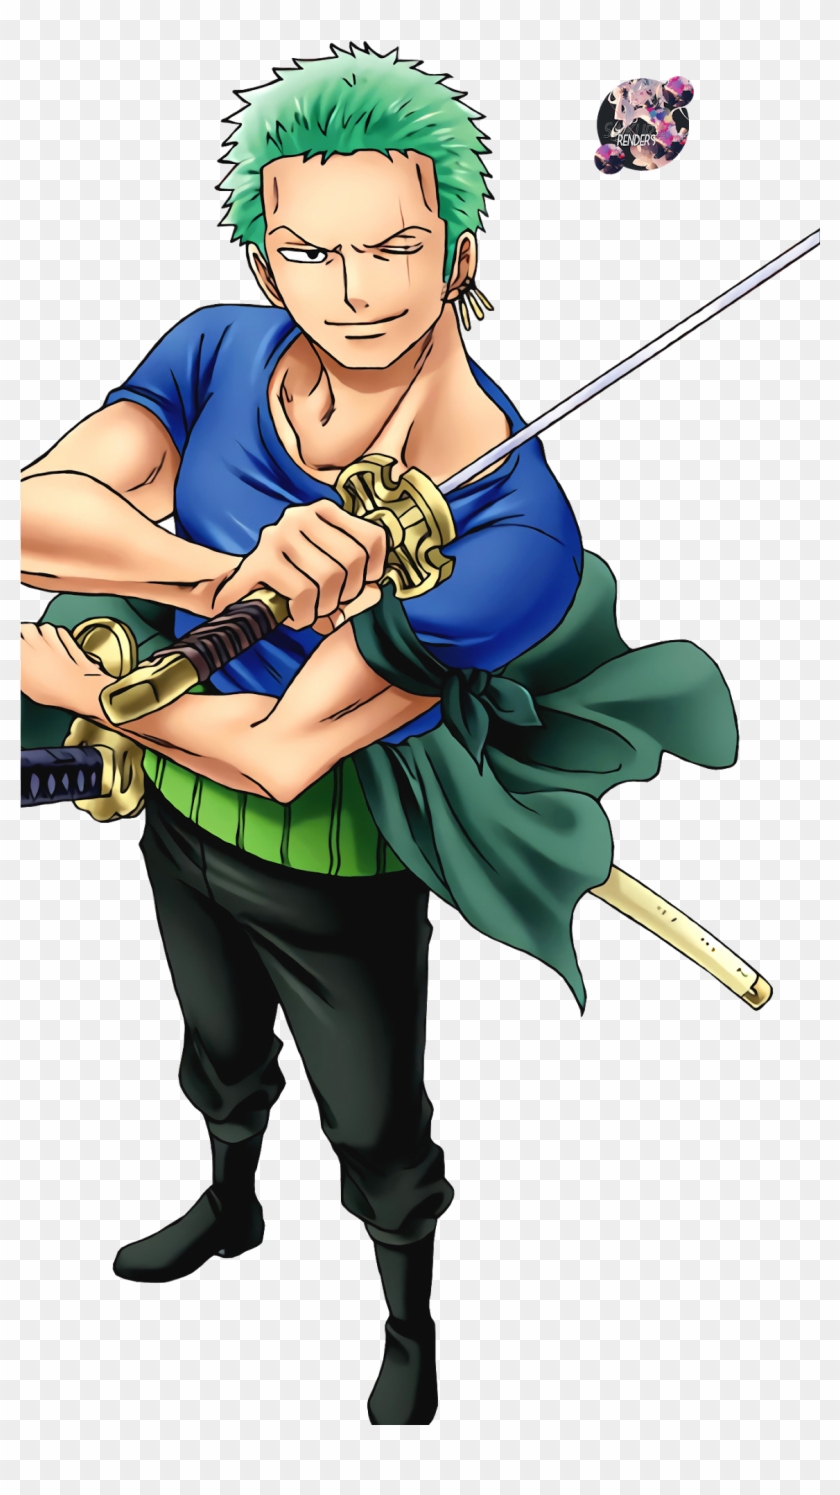 Roronoa Zoro - One Piece Zoro Png Transparent PNG - 427x632 - Free Download  on NicePNG